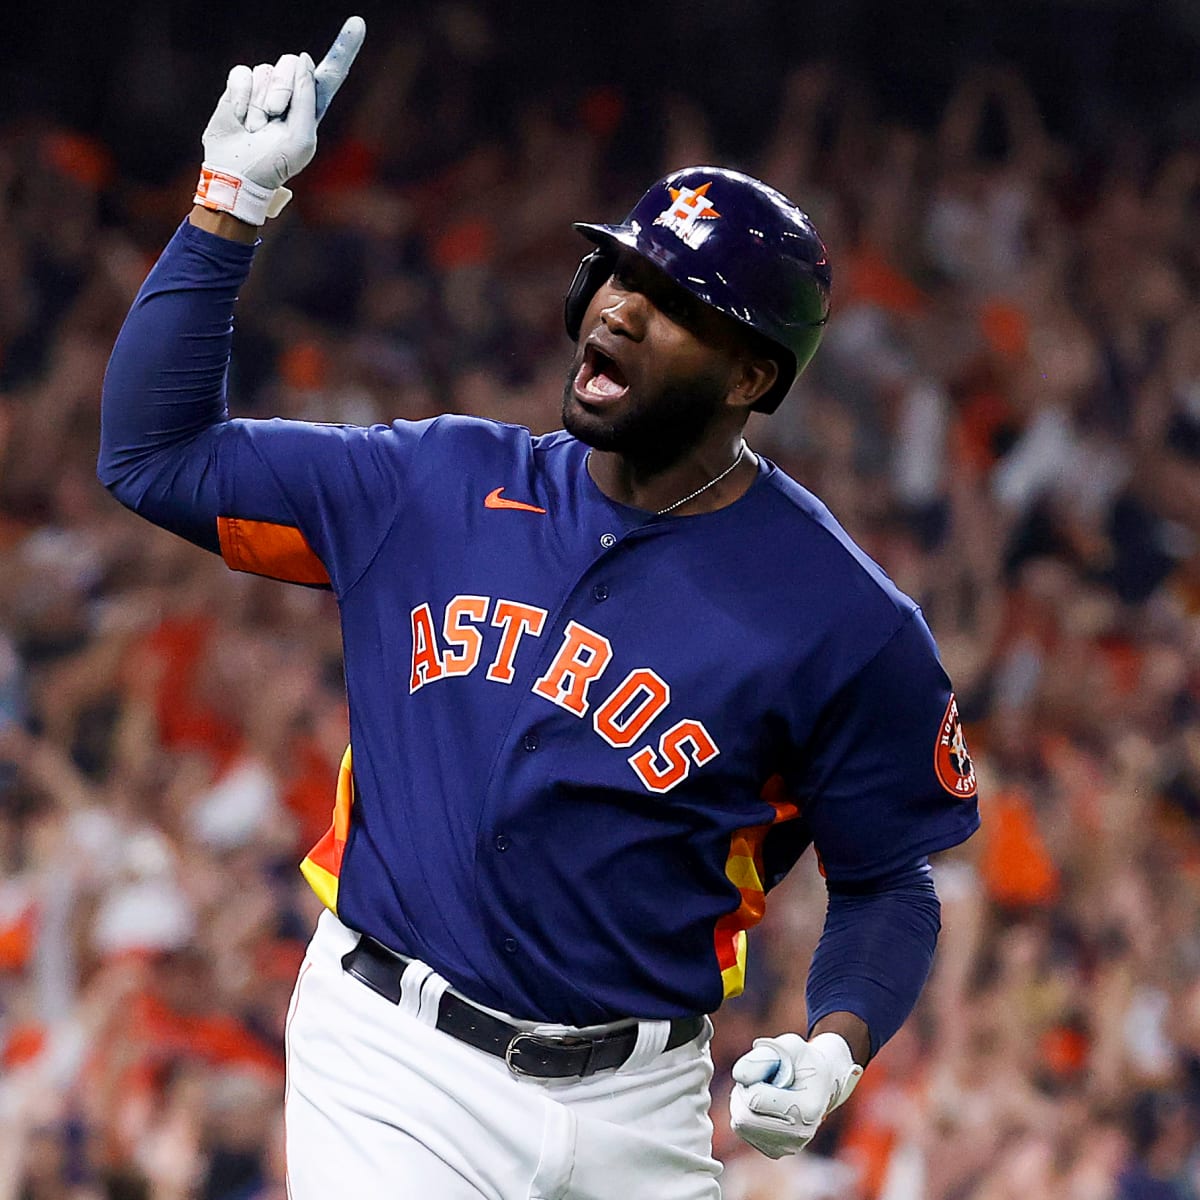 MLB News: Astros easily defeat Phillies in Game 6 to claim the